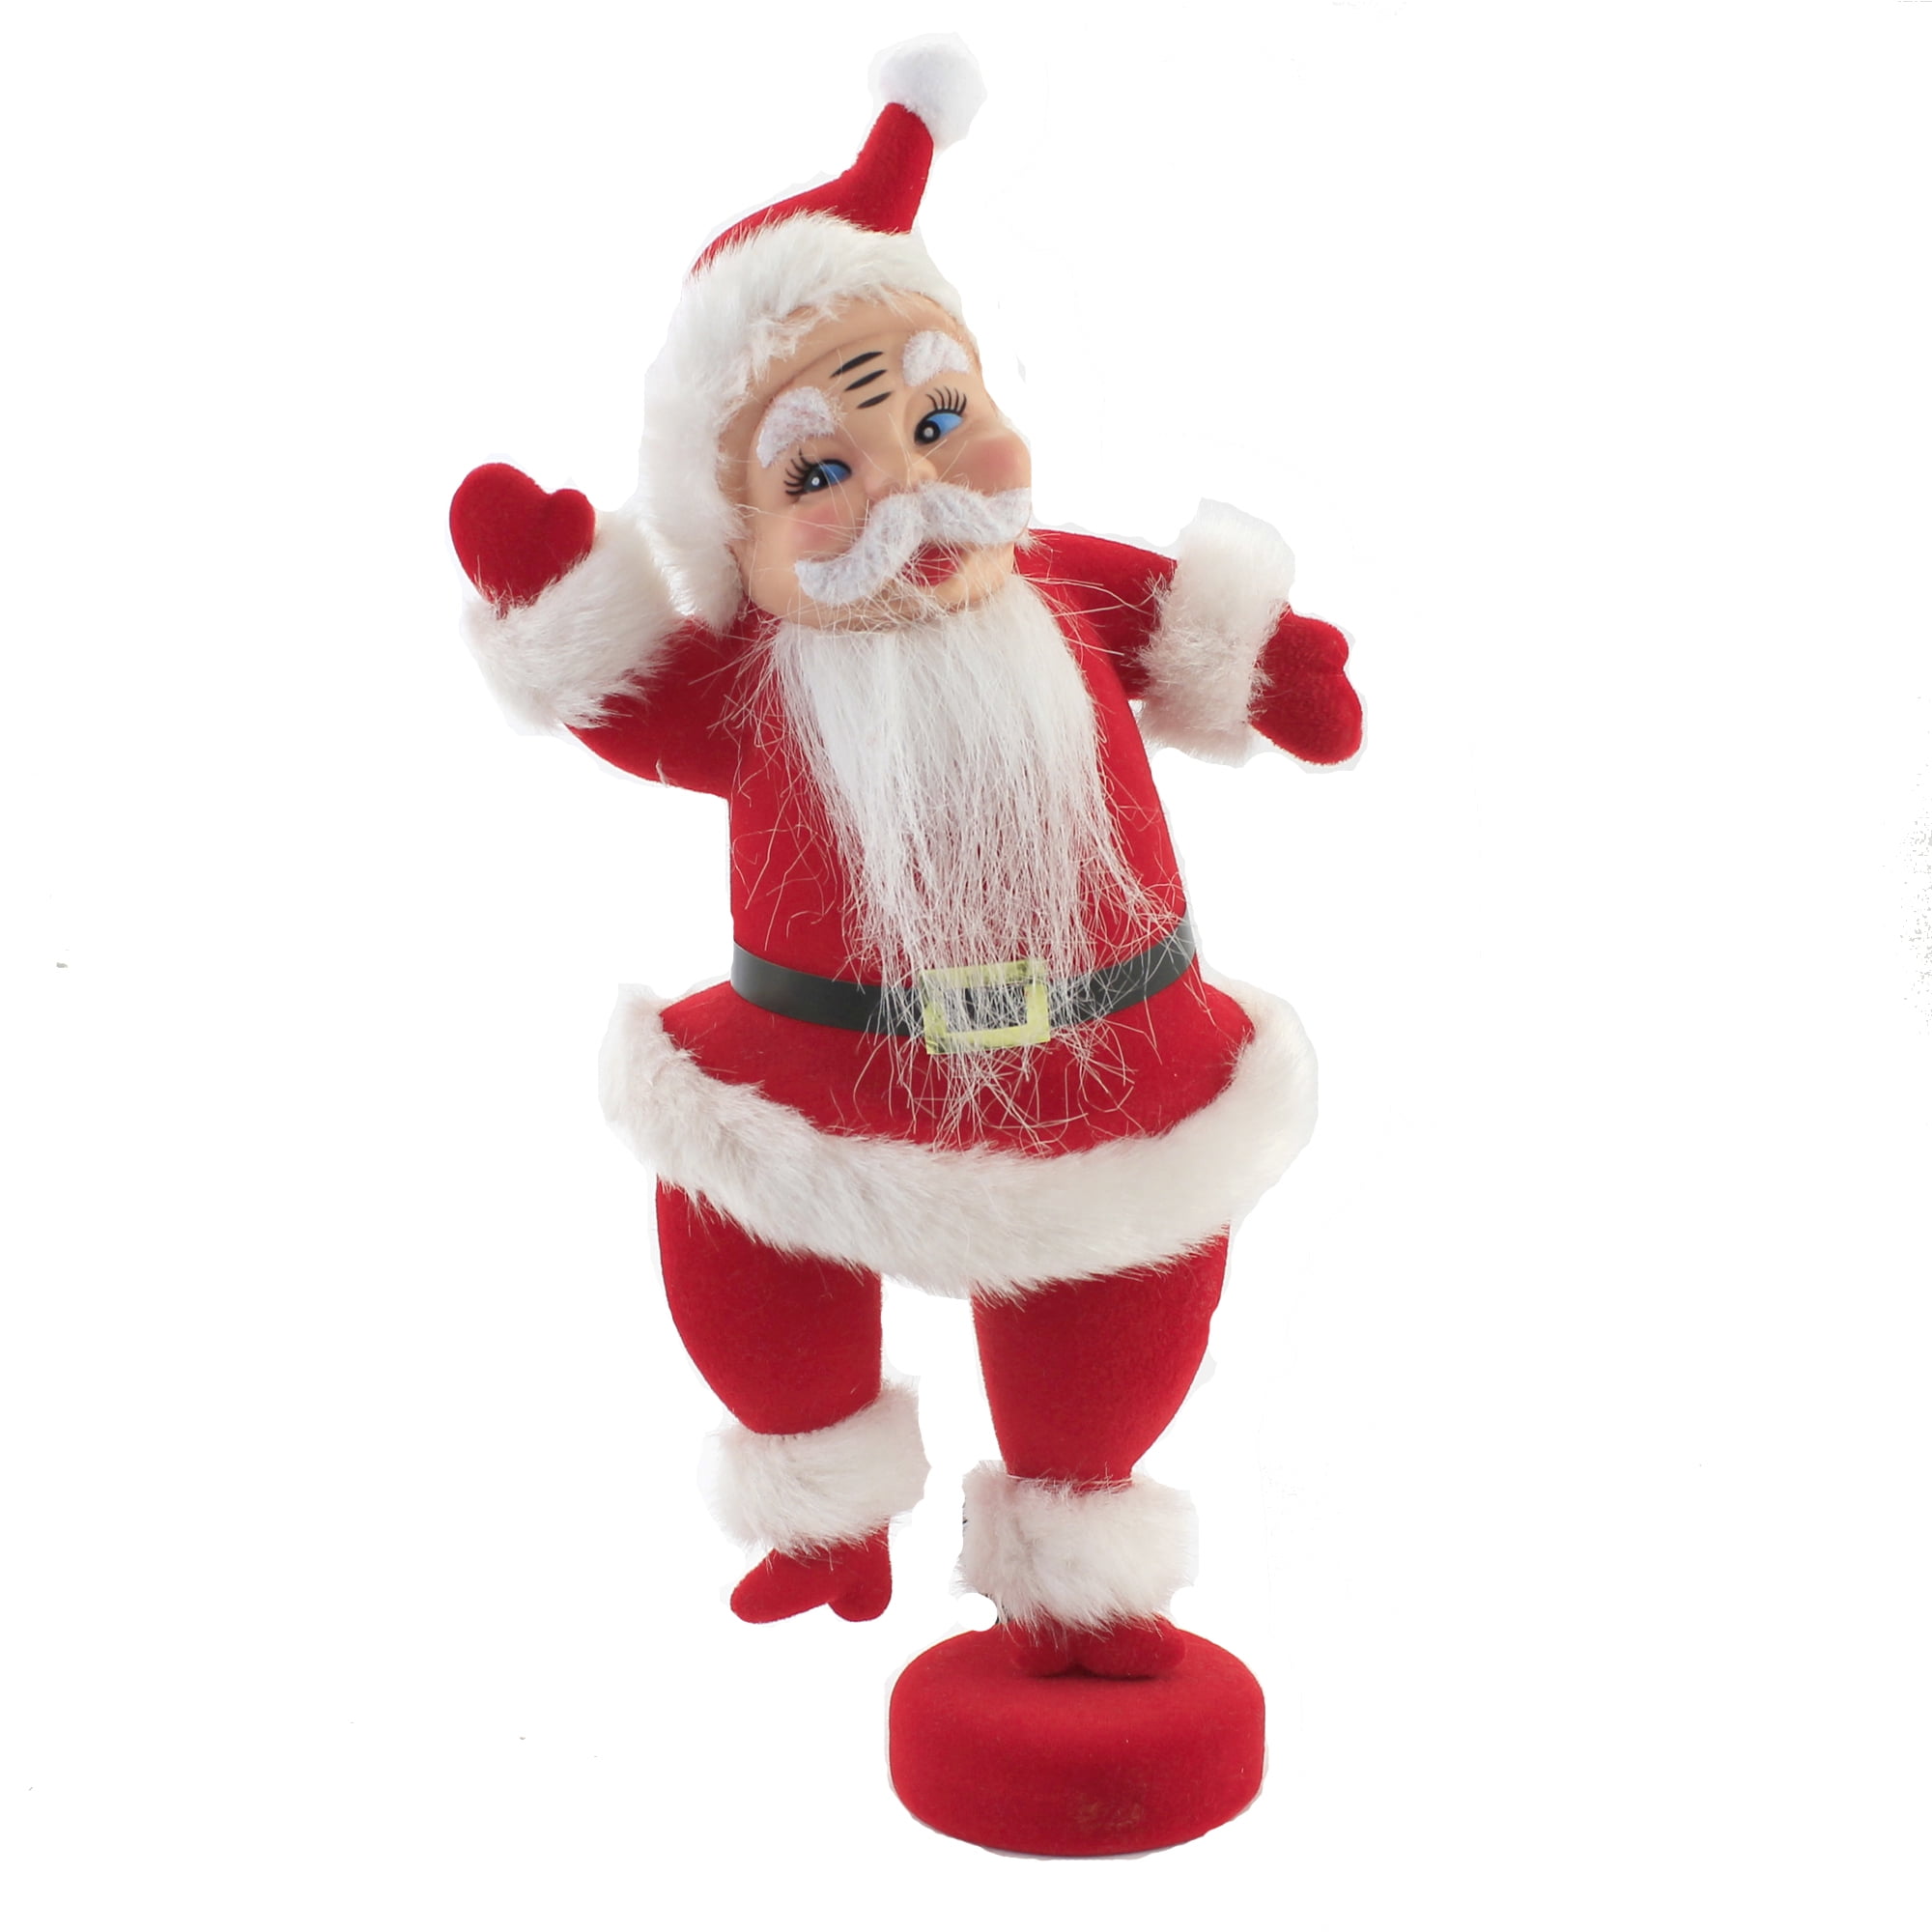 3 Vintage 1960's Plastic Flocked Santa ClausesCollectable Ornaments